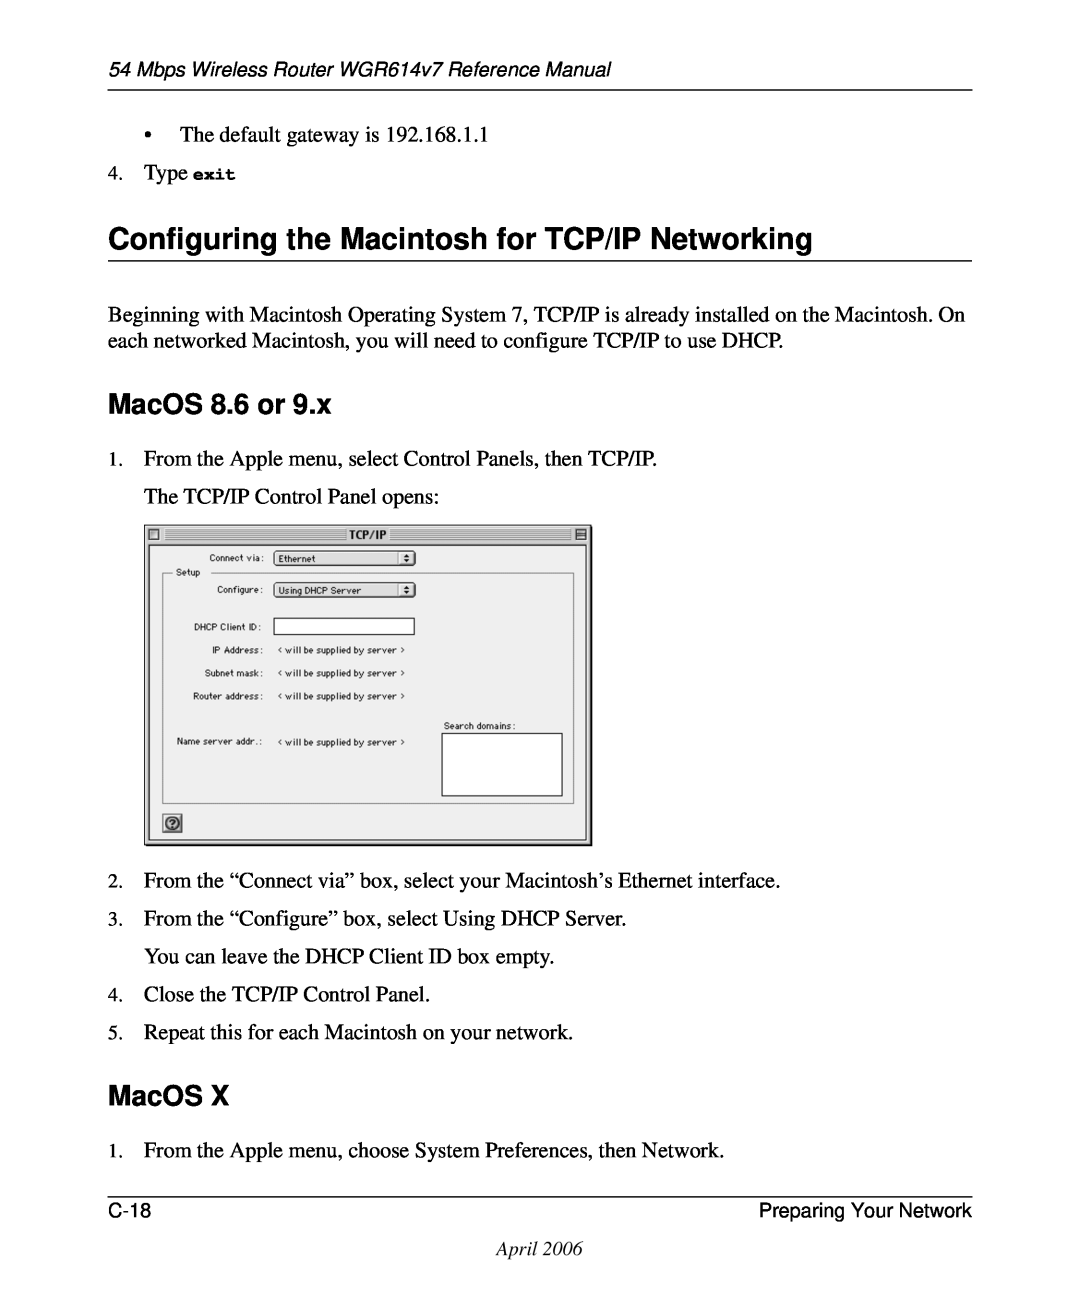 NETGEAR WGR614v7 manual Configuring the Macintosh for TCP/IP Networking, MacOS 8.6 or 